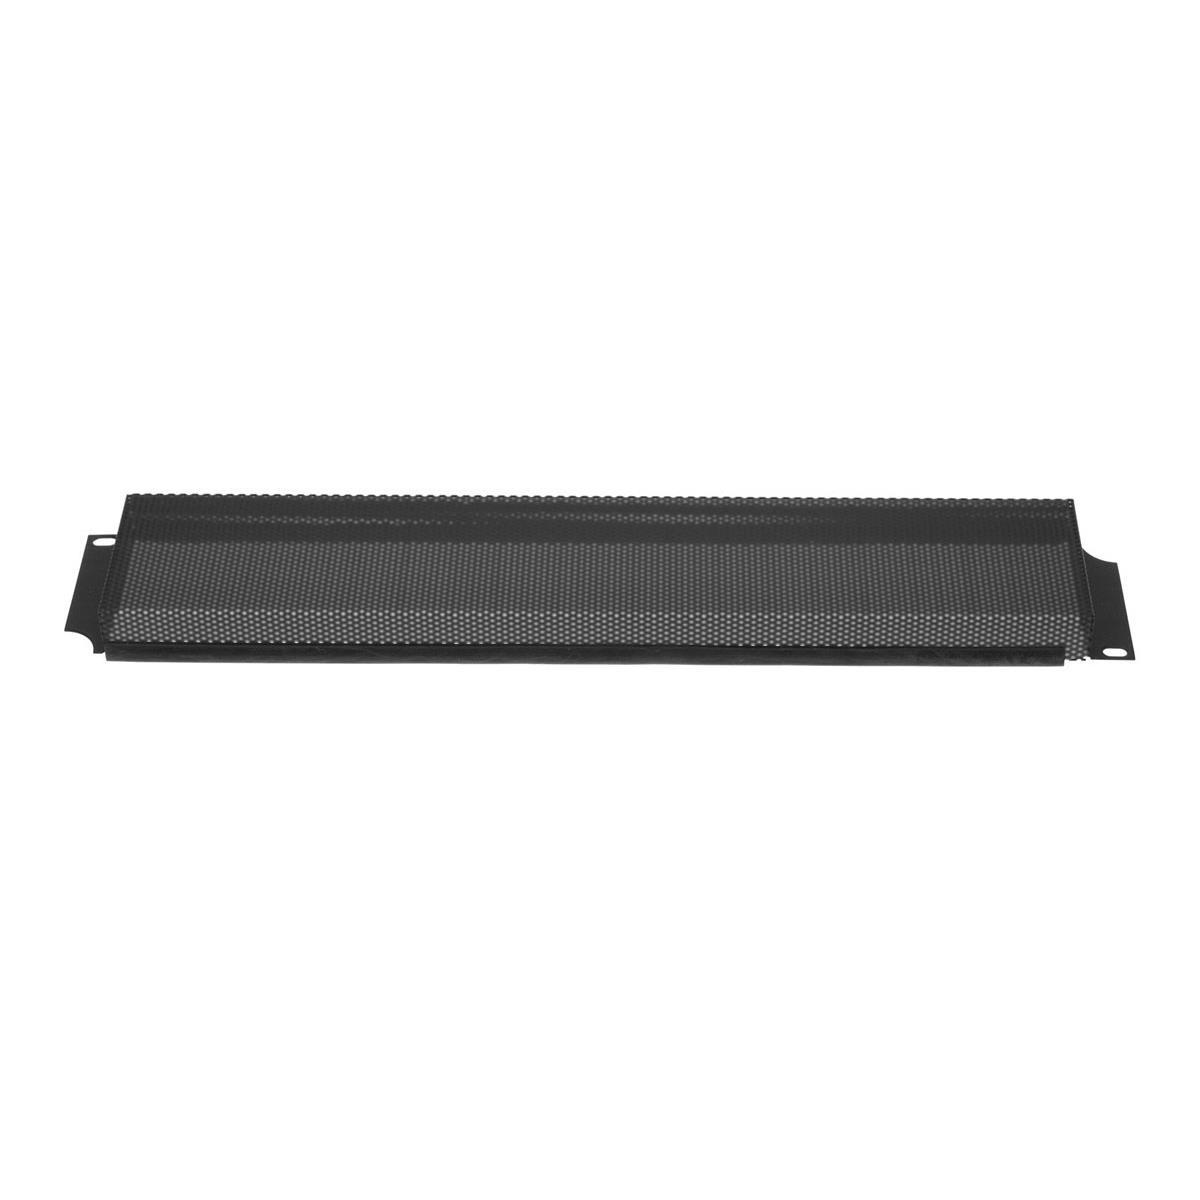 Image of Lowell Manufacturing SSC-2V 2U Rack Panel Security Cover